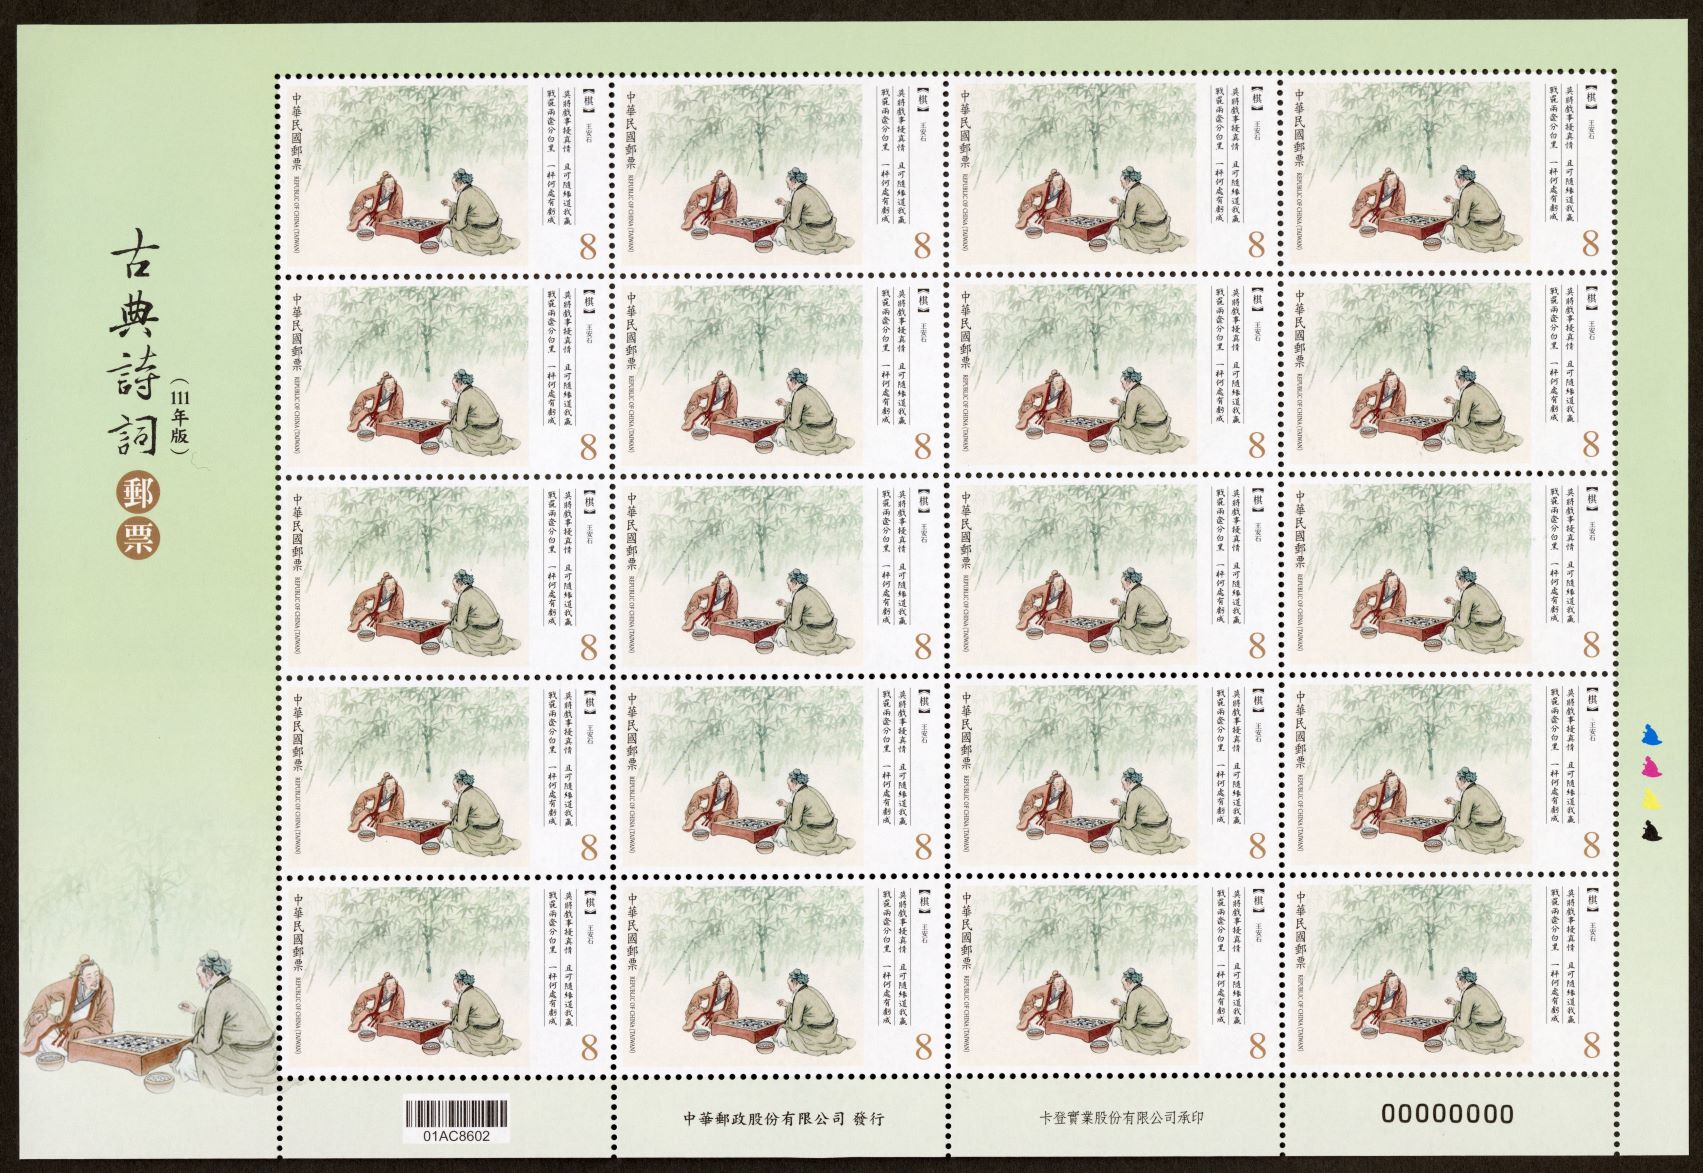 (Sp. 724.20)Sp.724 Classical Chinese Poetry Postage Stamps (Issue of 2022)